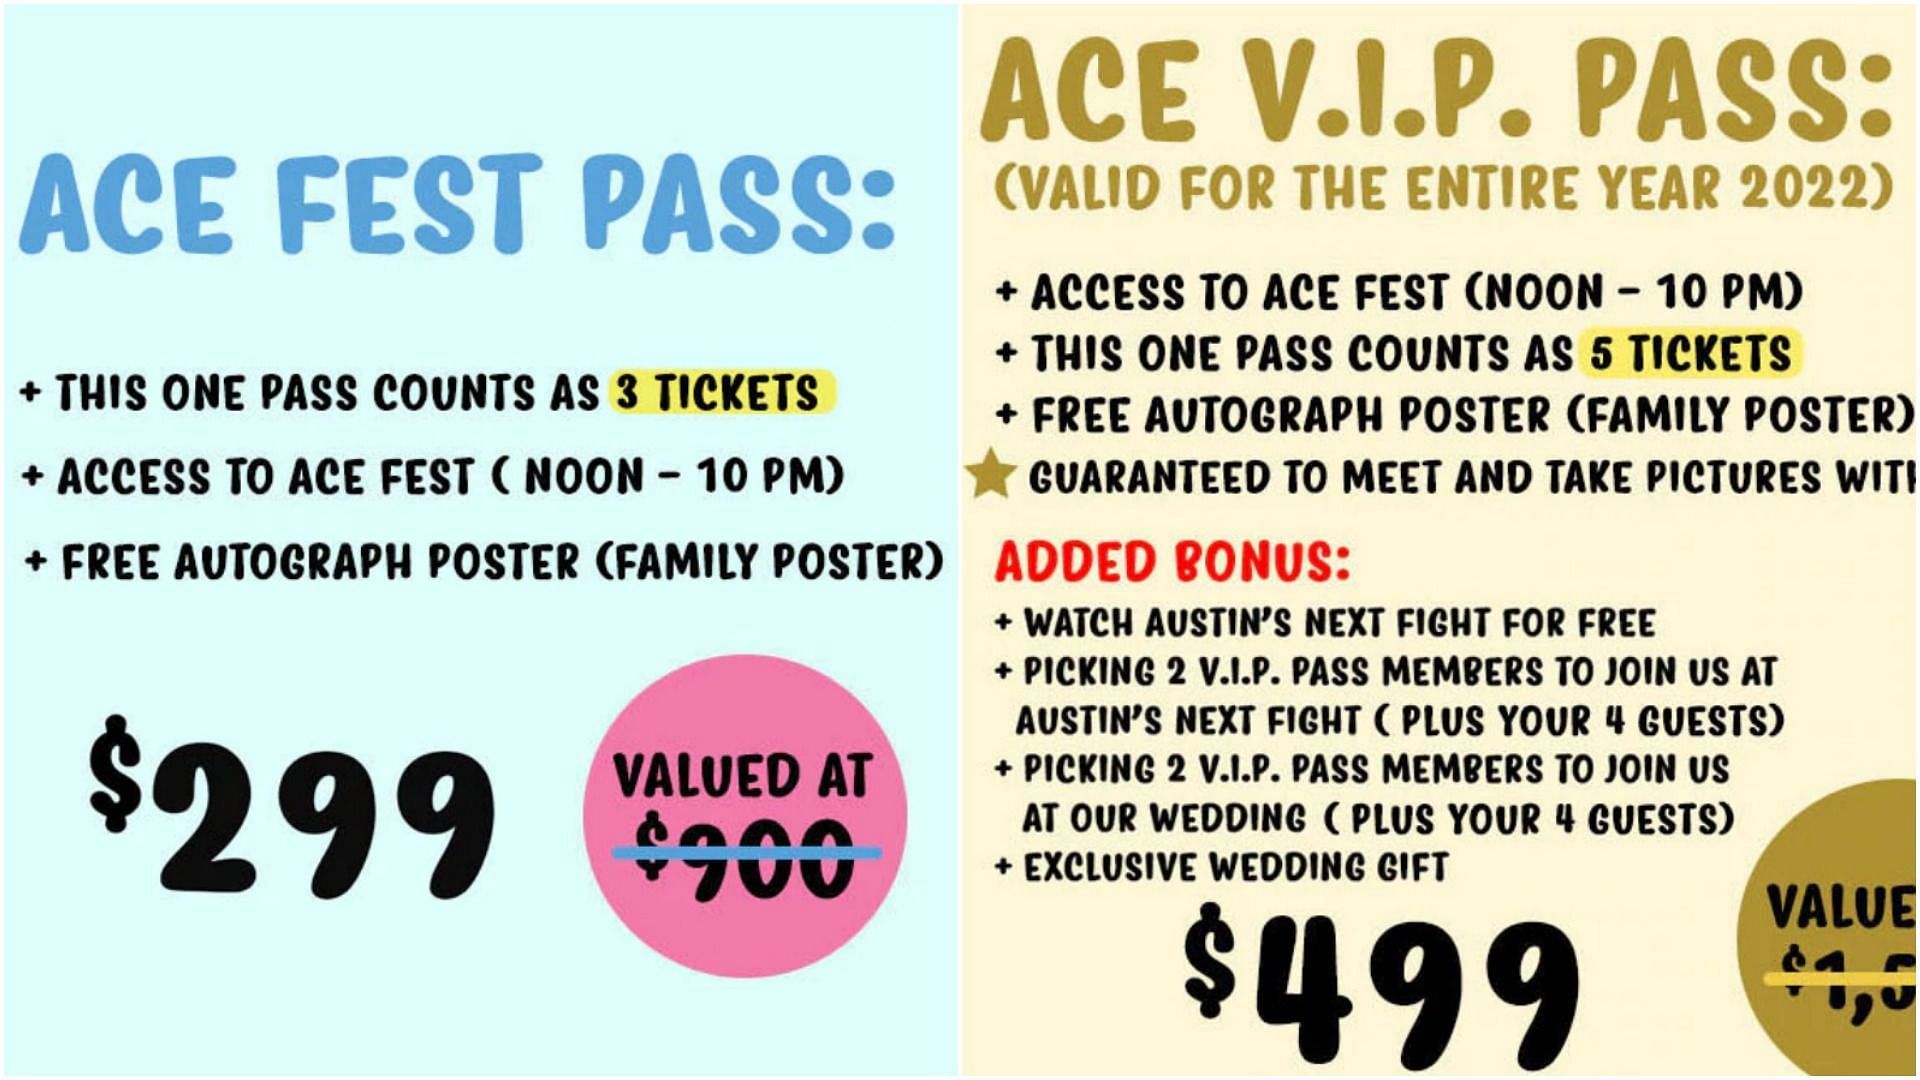 The prices and added perks of the two tickets (Image via theacefamilyfest.com)